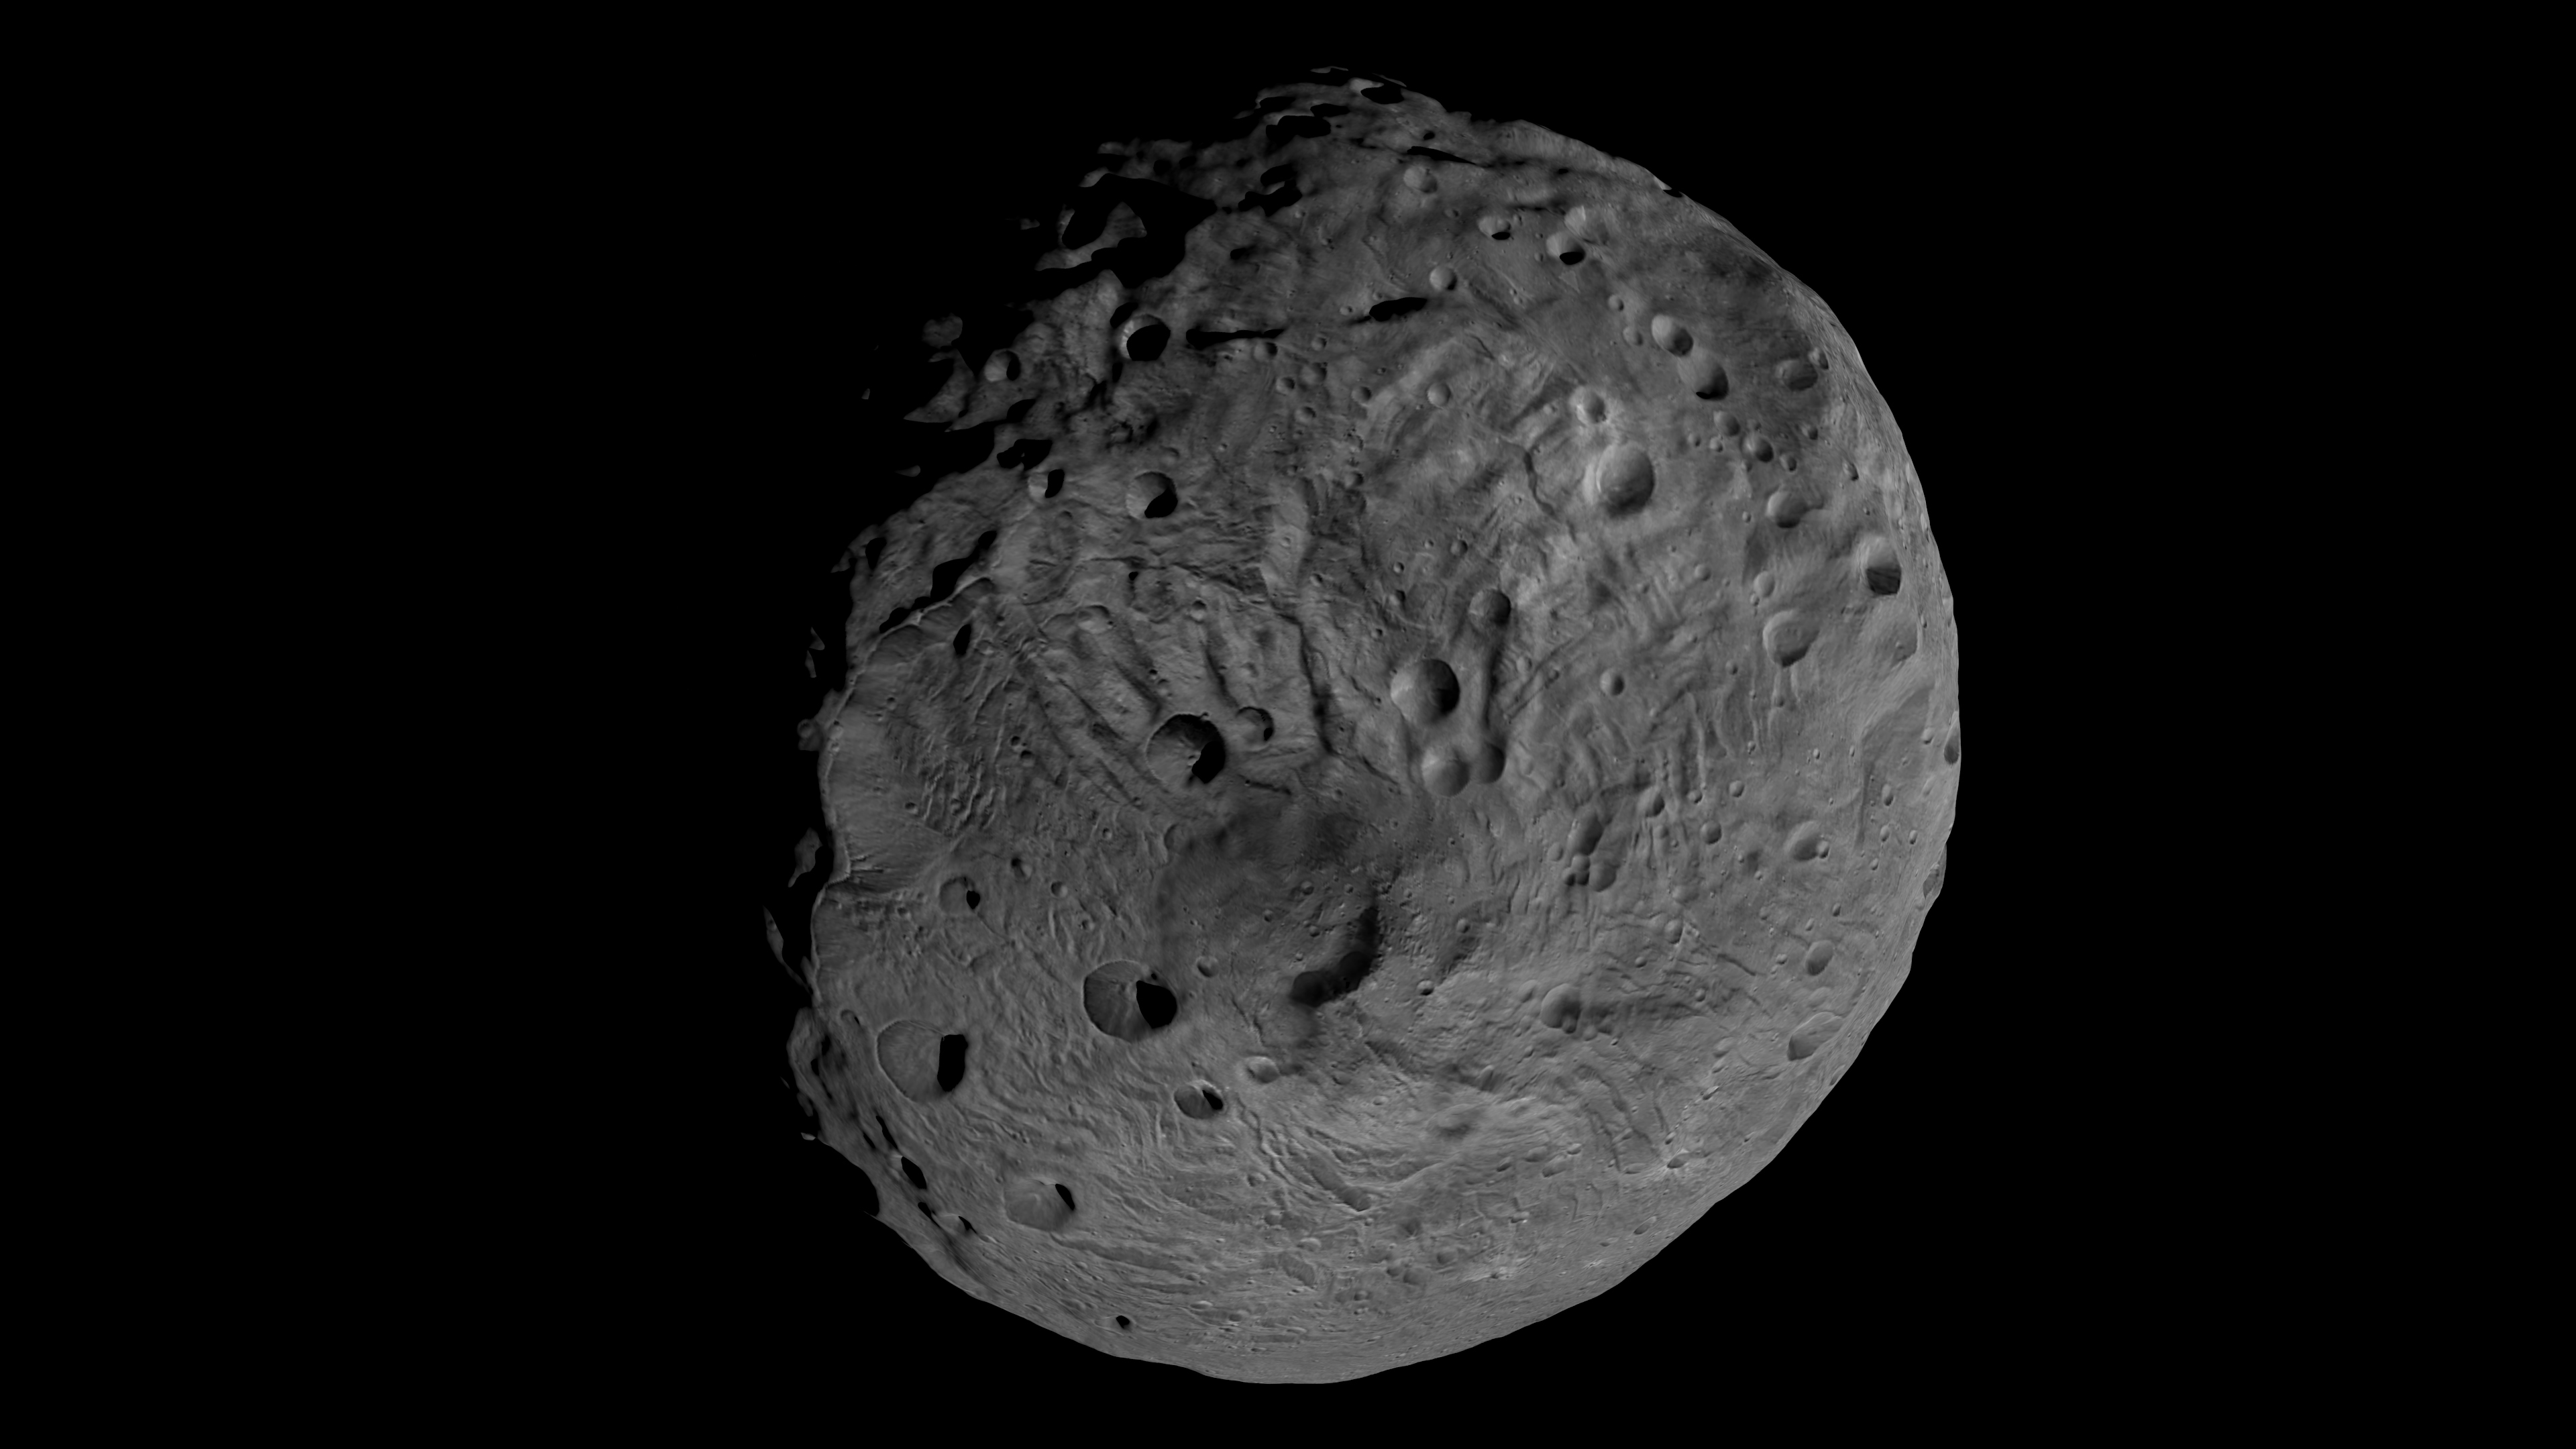 Image of the giant asteroid Vesta by Dawn